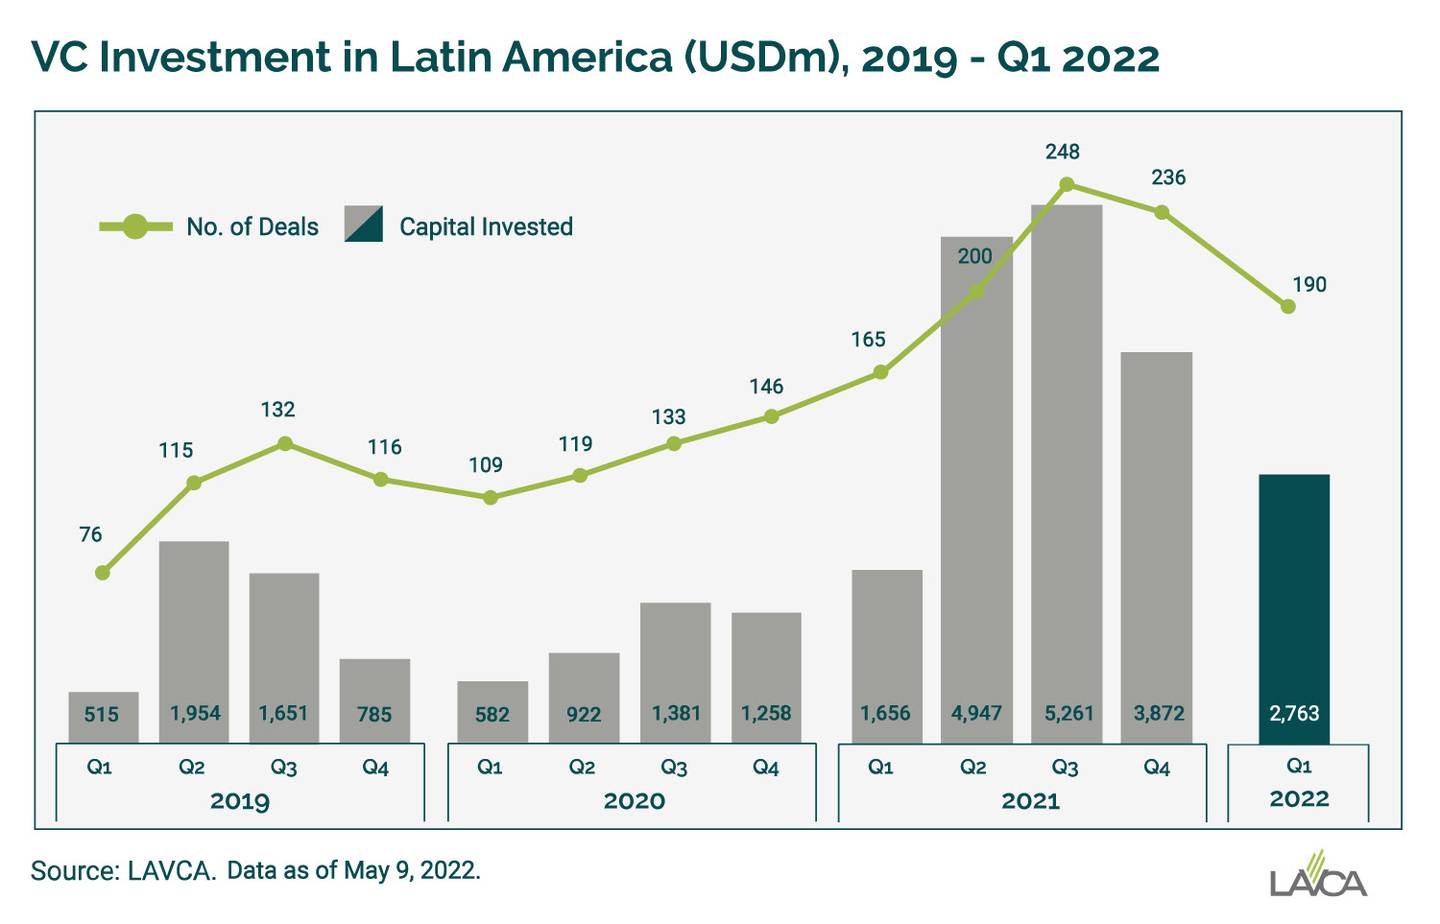 Lavca's data on VC investments for LatAmdfd